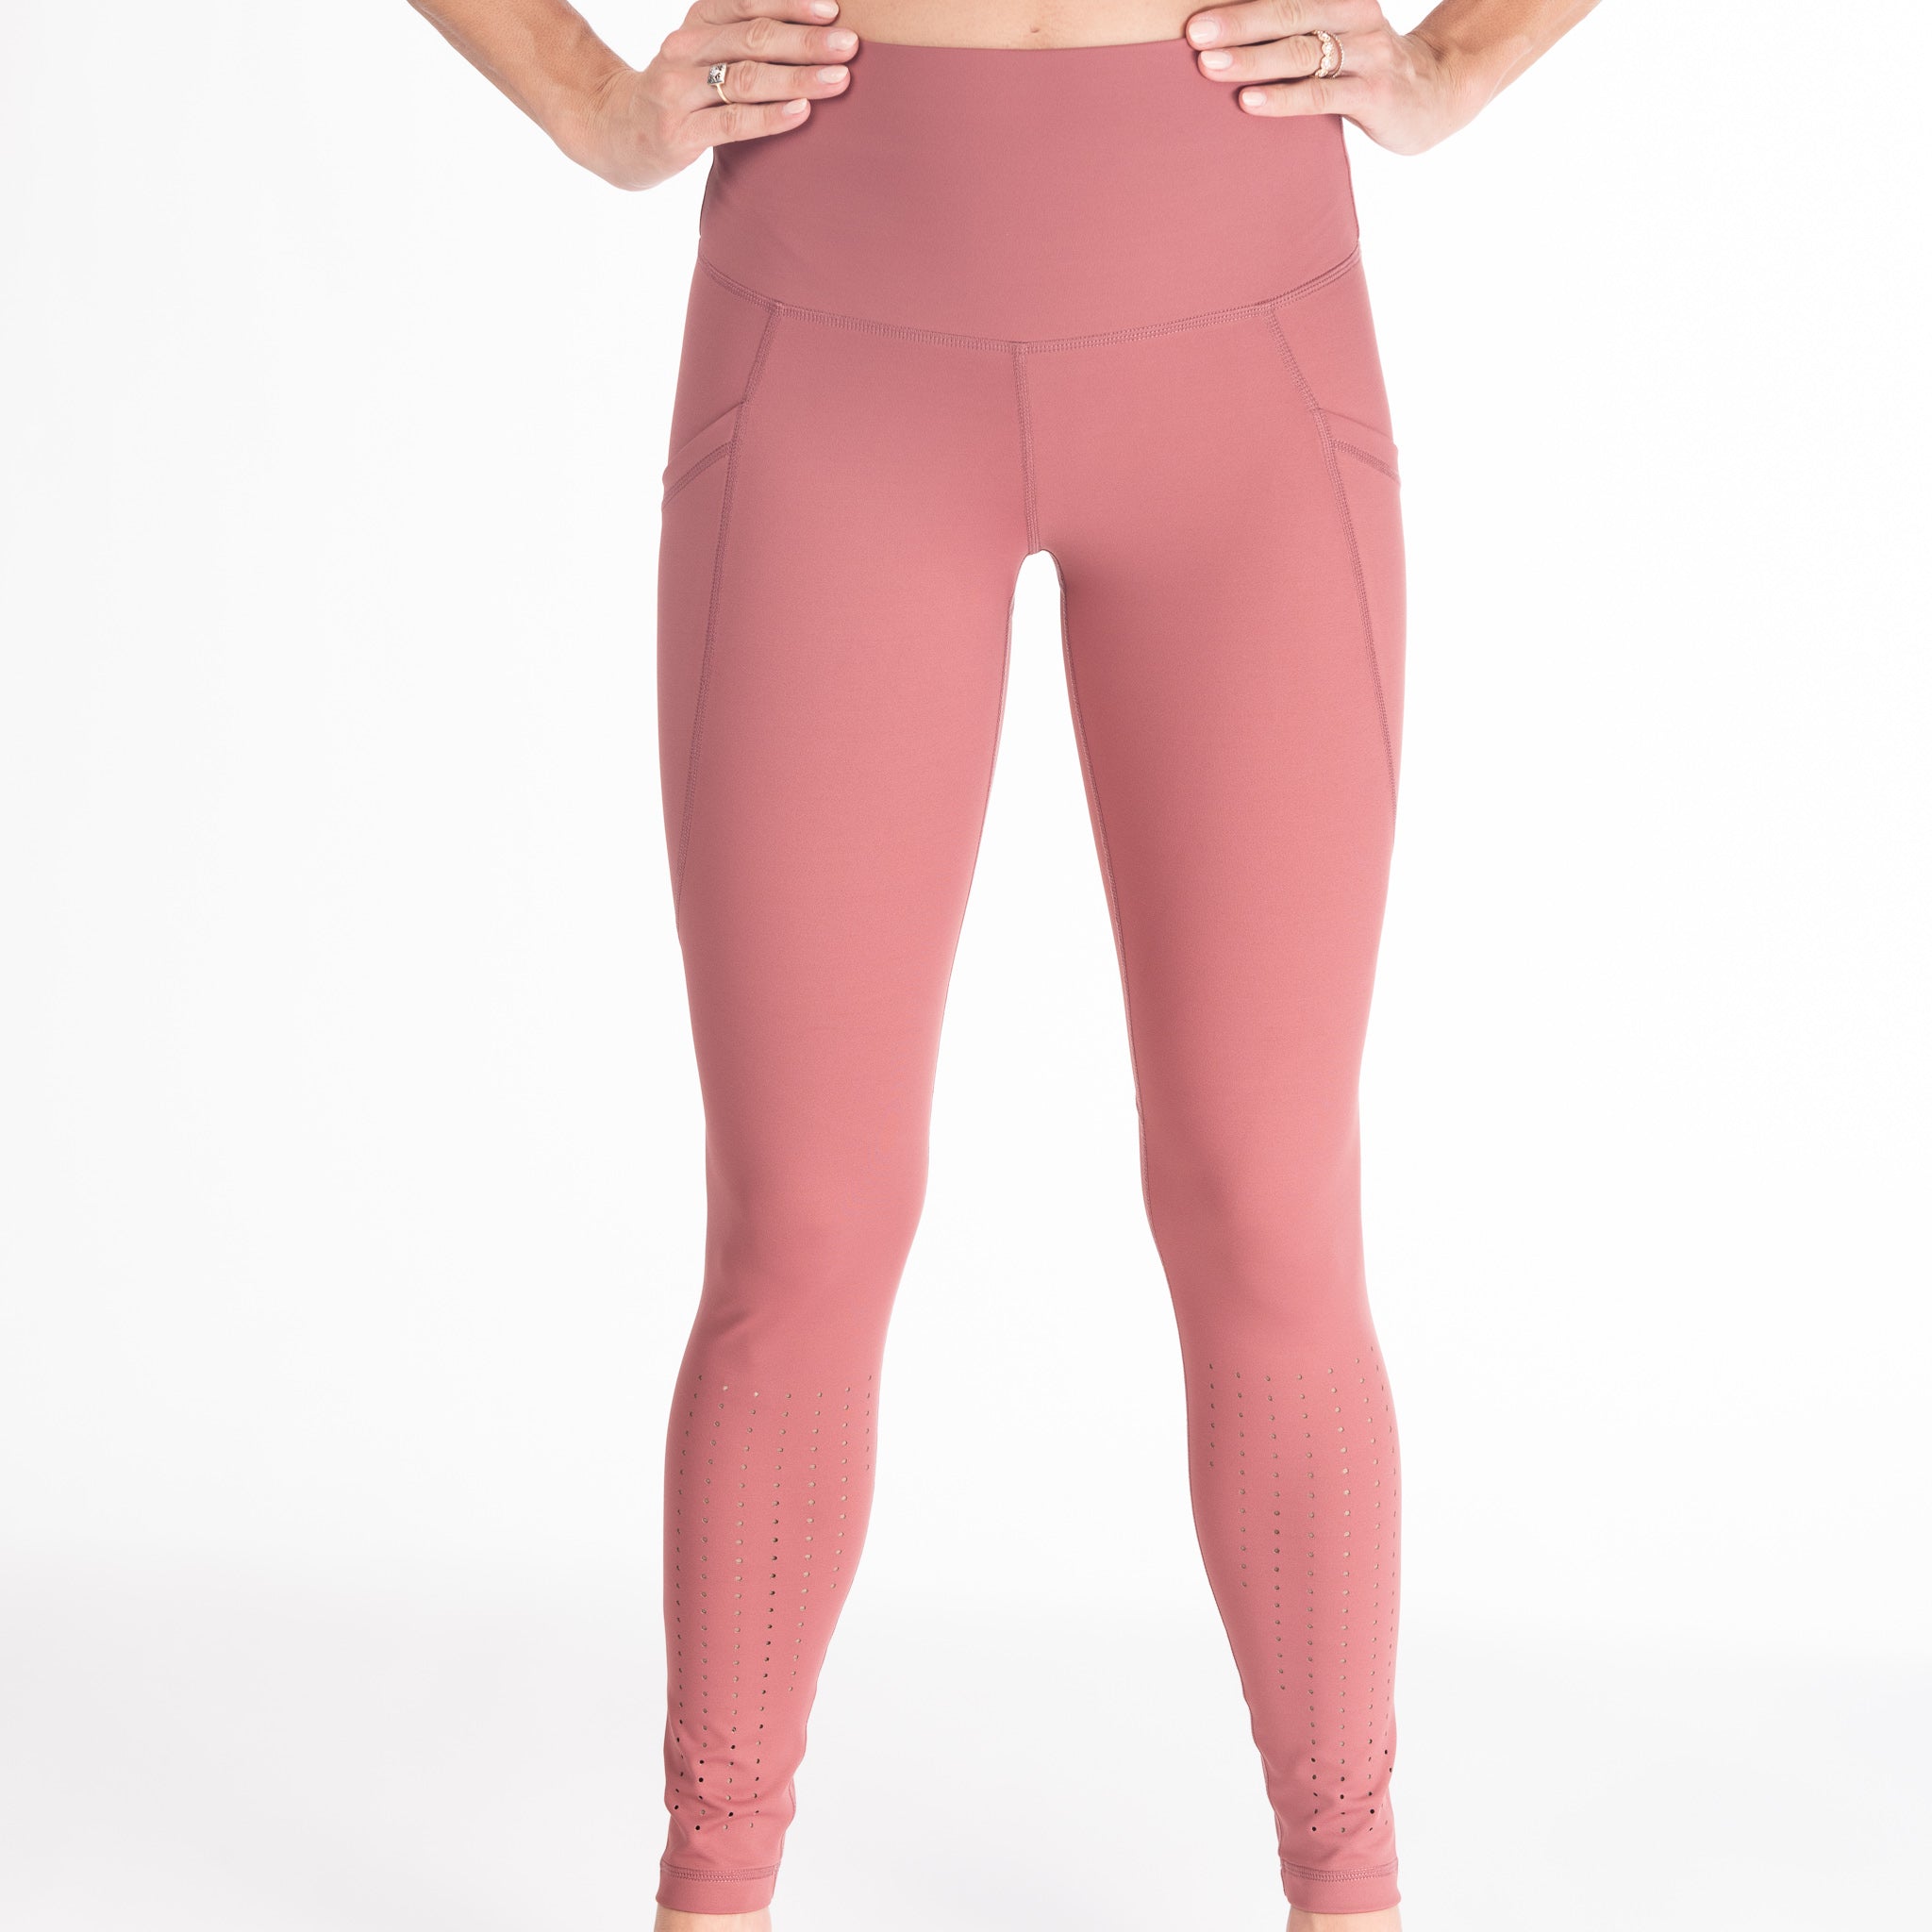 Up To 82% Off on High Waist Leggings Tummy Con